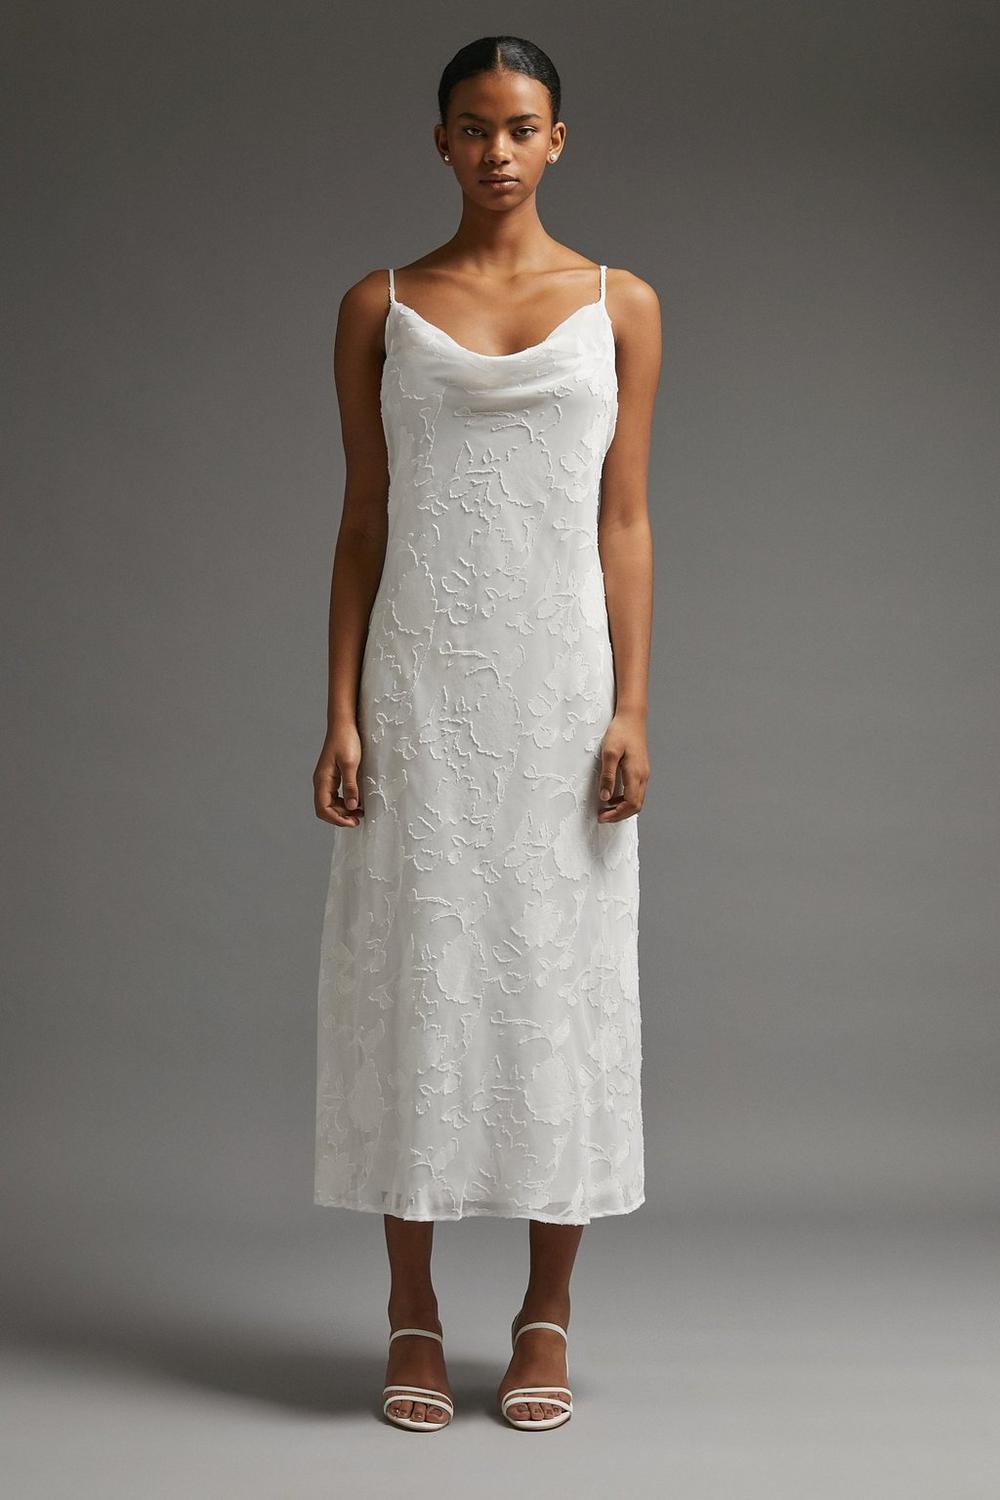 31 of the Best Casual Wedding Dresses ...